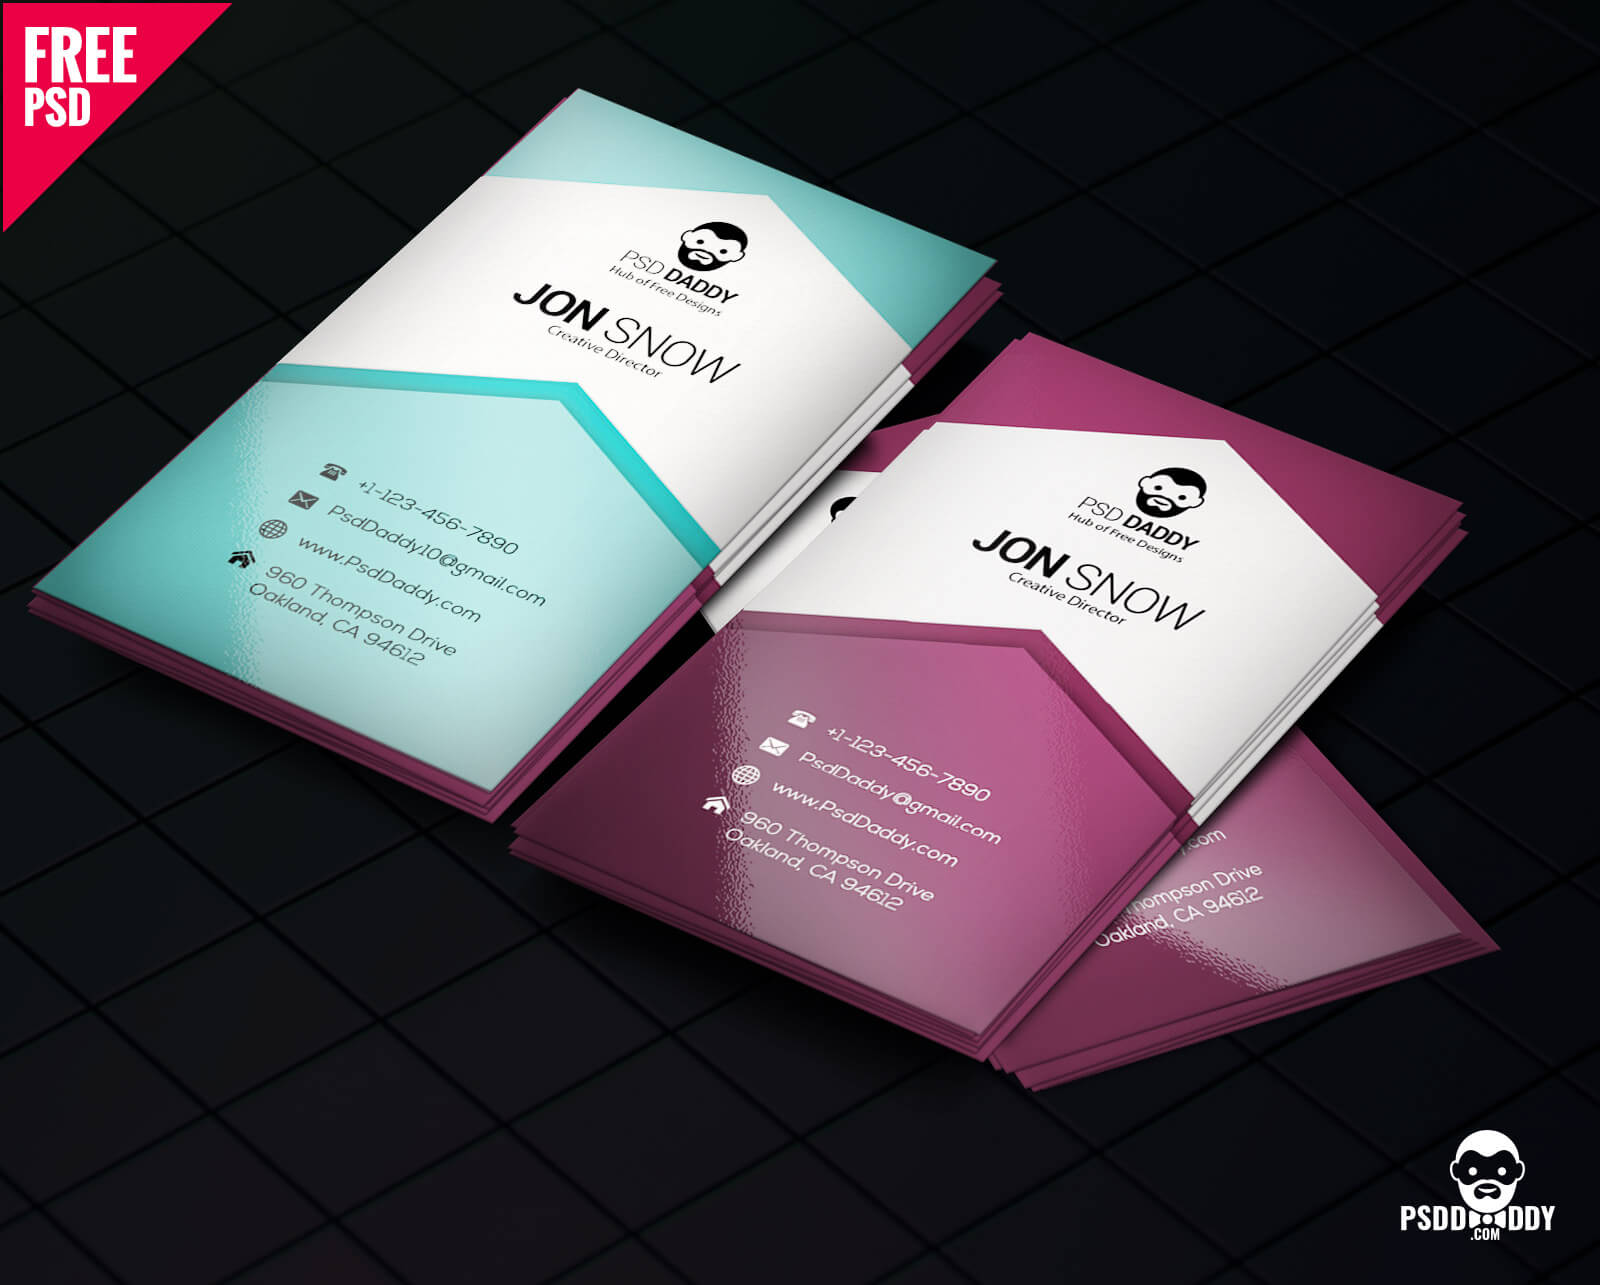 Download]Creative Business Card Psd Free | Psddaddy For Business Card Size Photoshop Template